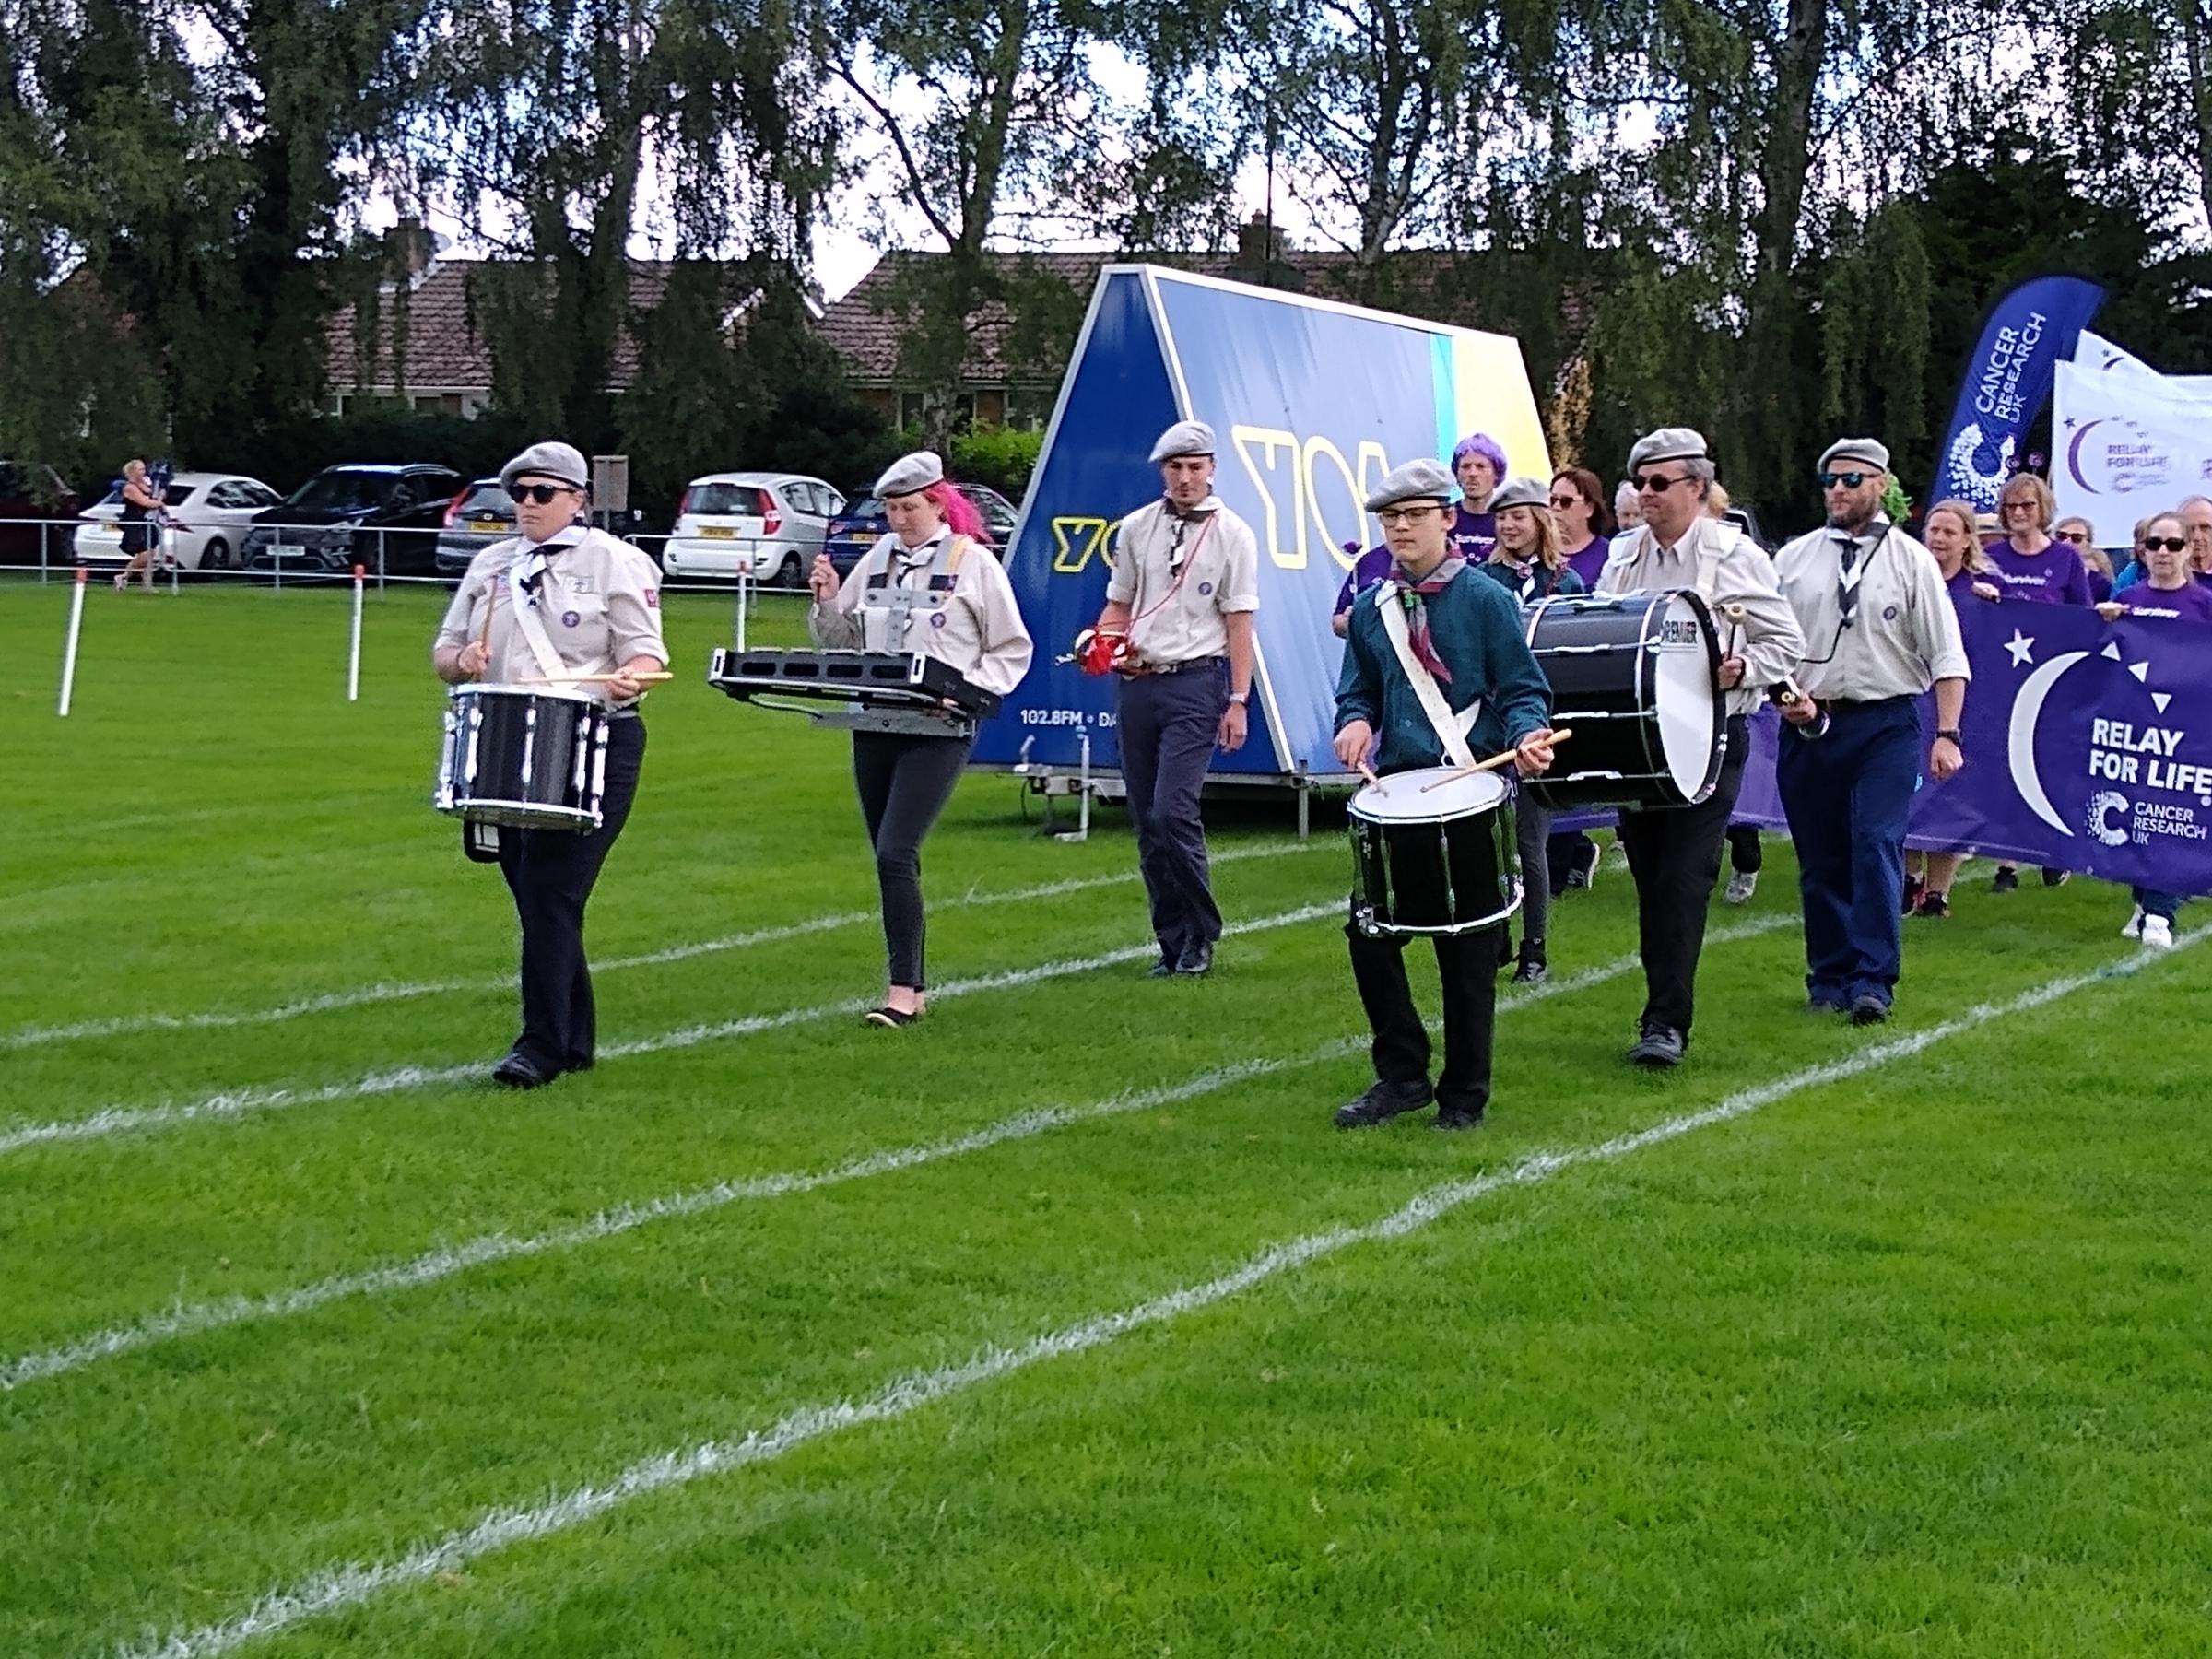 The St Chads Greys Scout Band leads the way at the 2023 York Relay for Life for Cancer Research UK